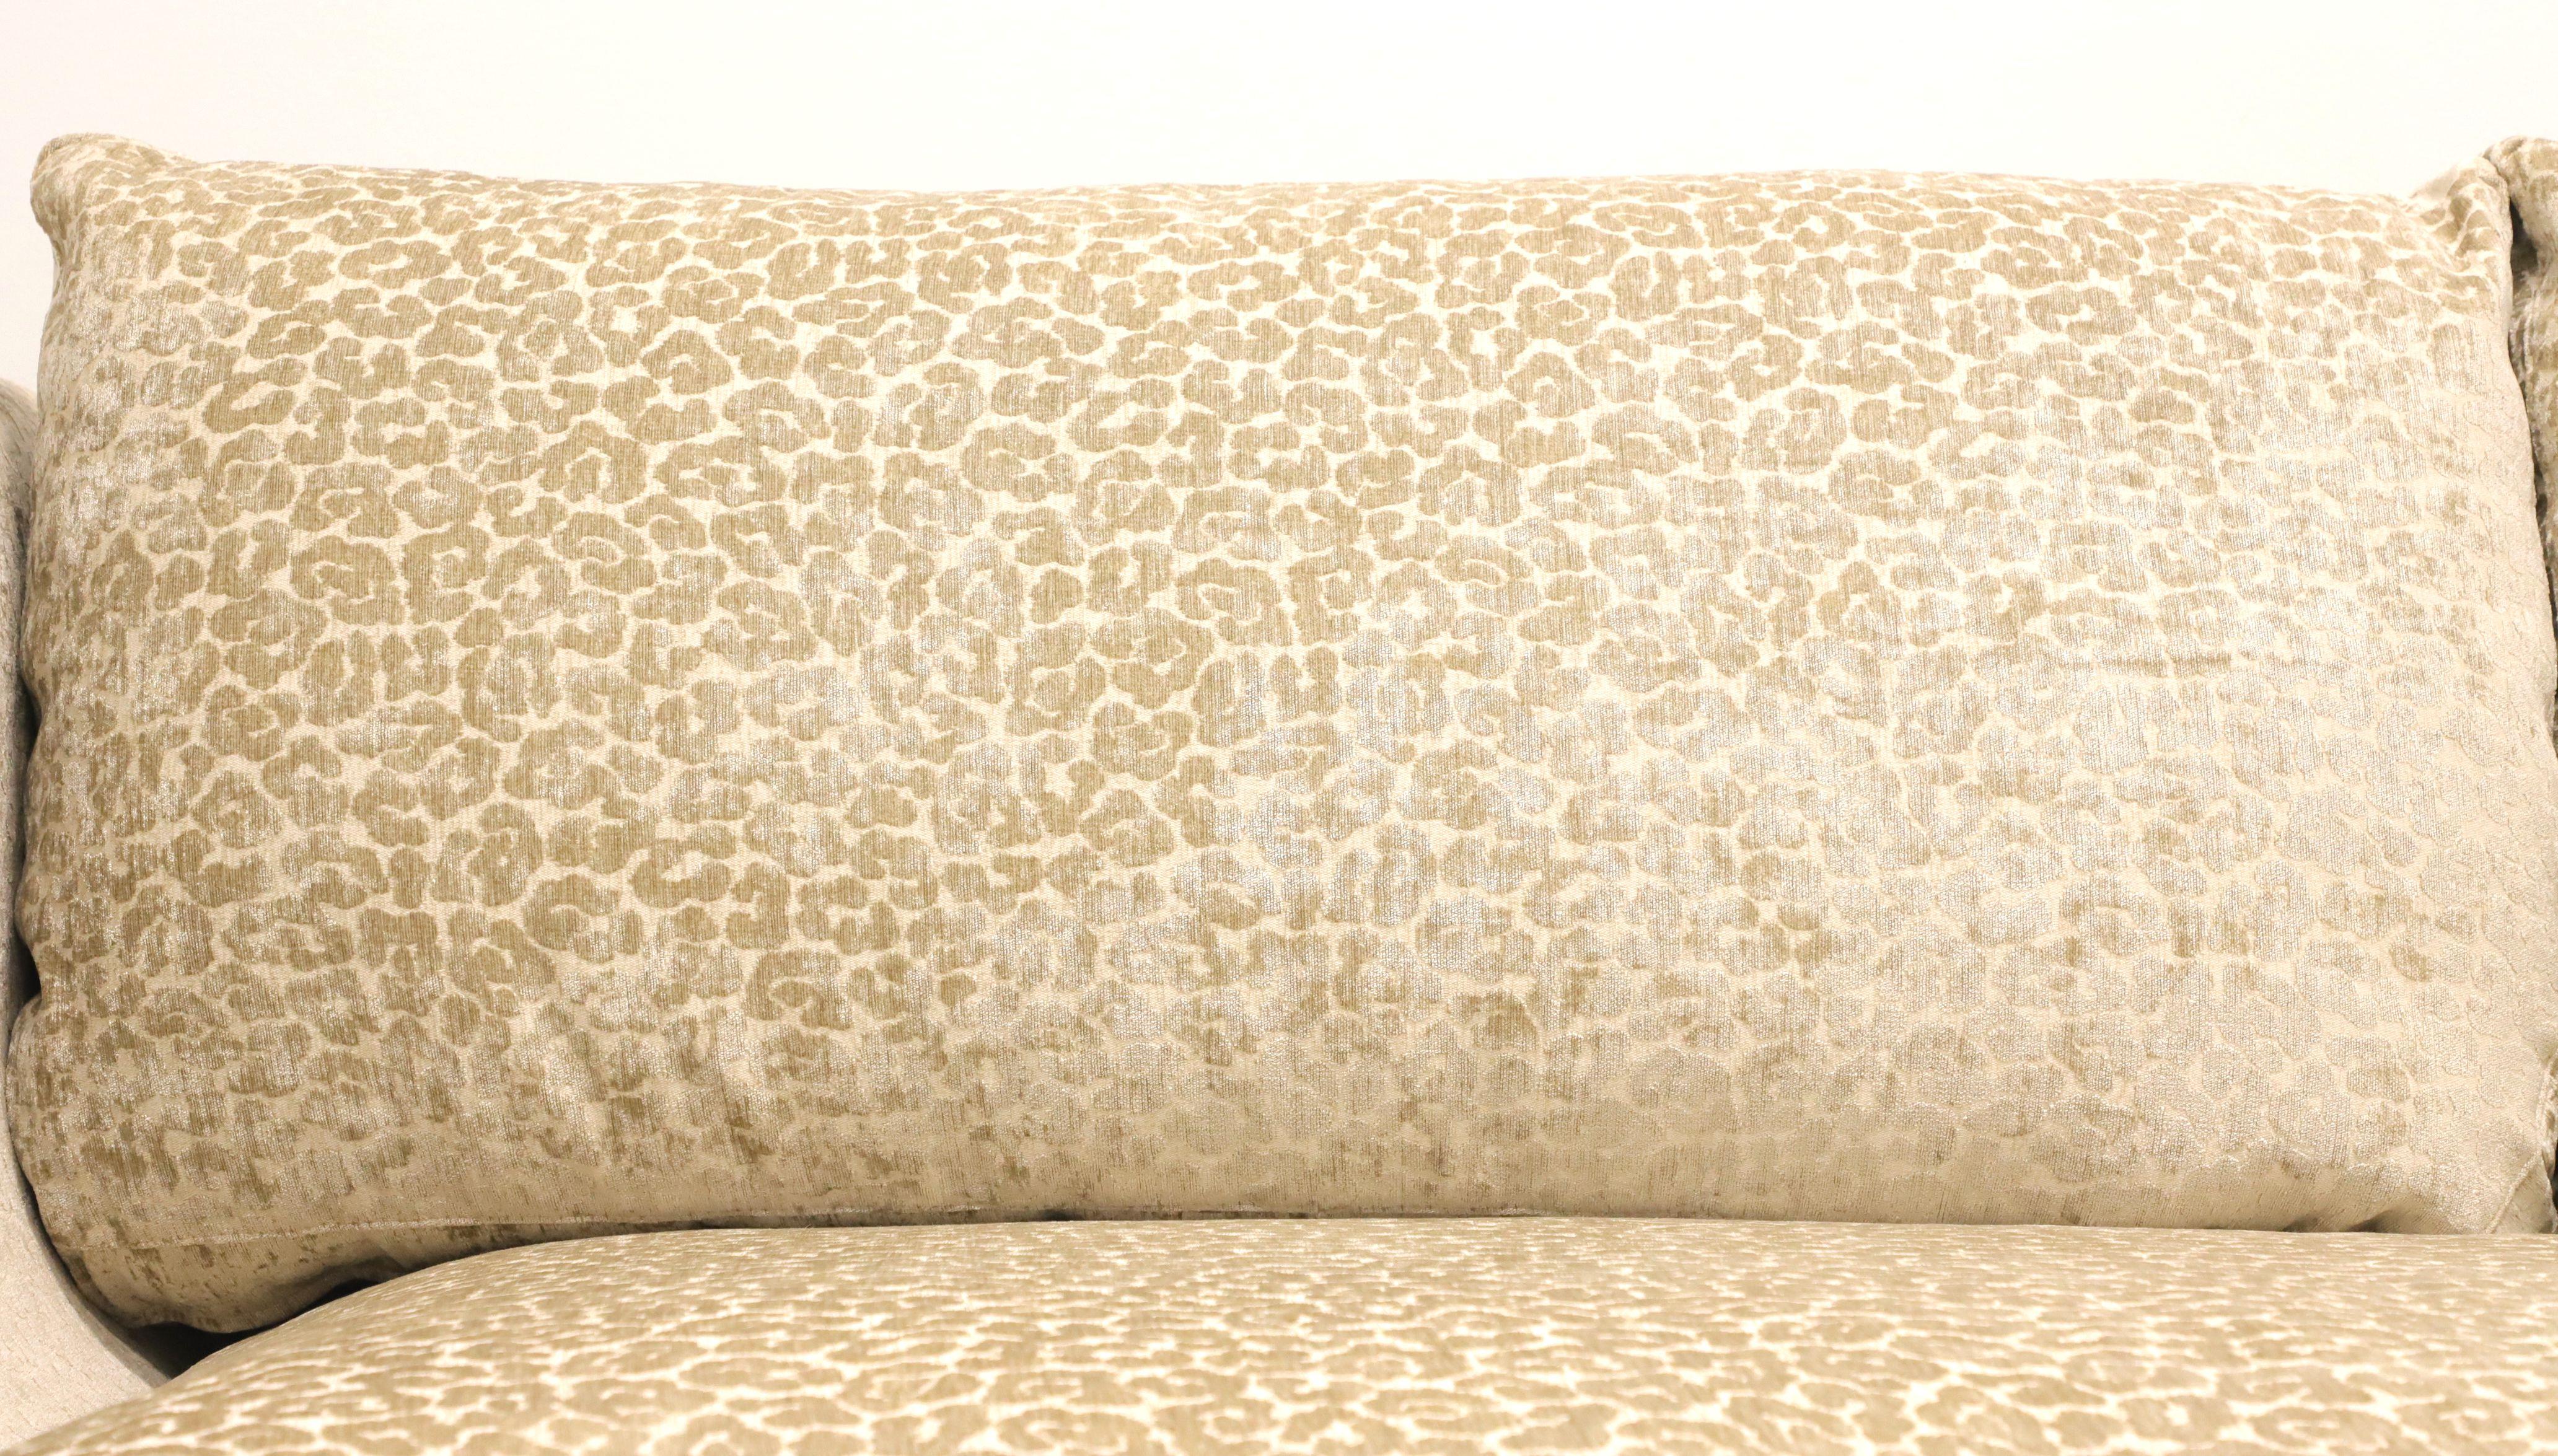 Fabric HICKORY WHITE Transitional Leopard Print Sofa with Nailhead Trim For Sale